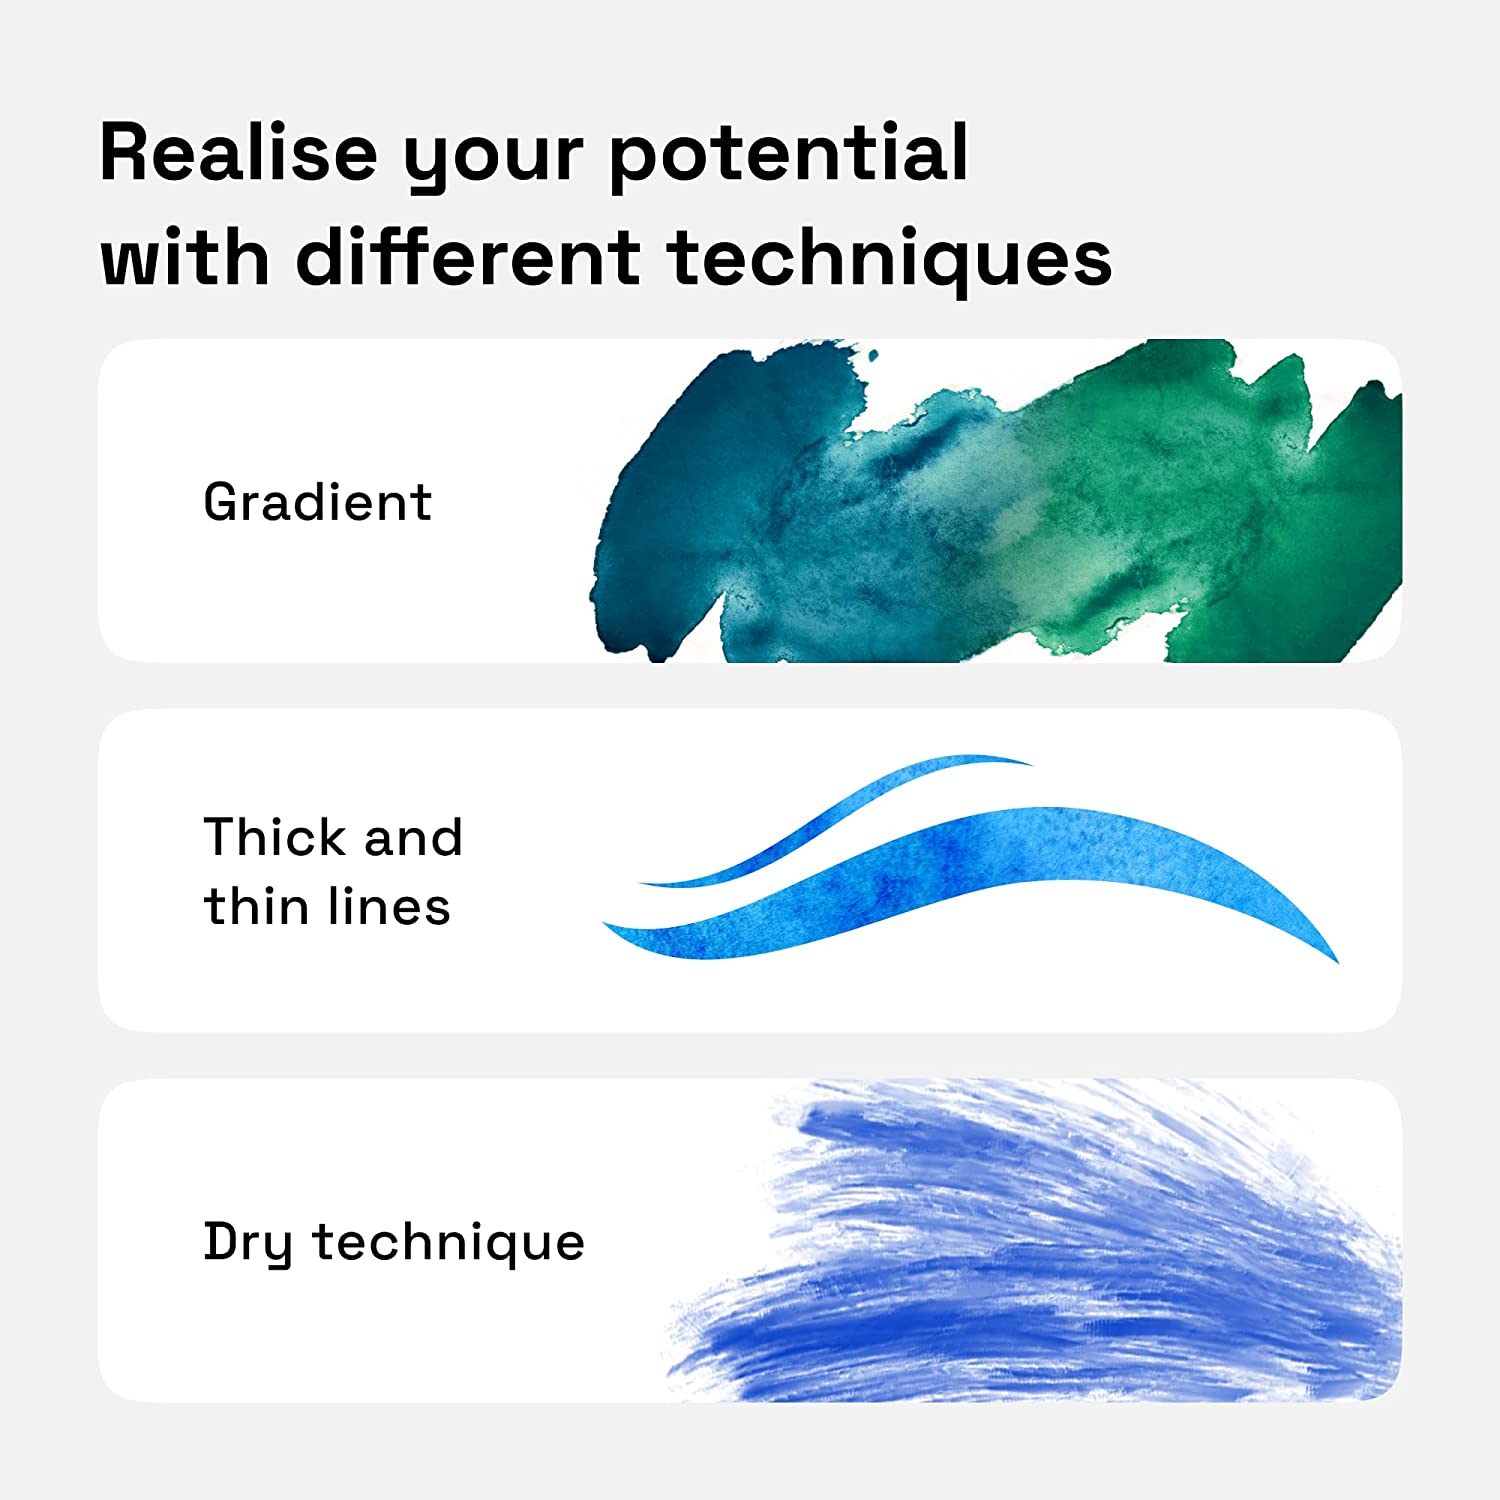 realise your potential with different techniques: gradient, thick & thin lines, dry technique